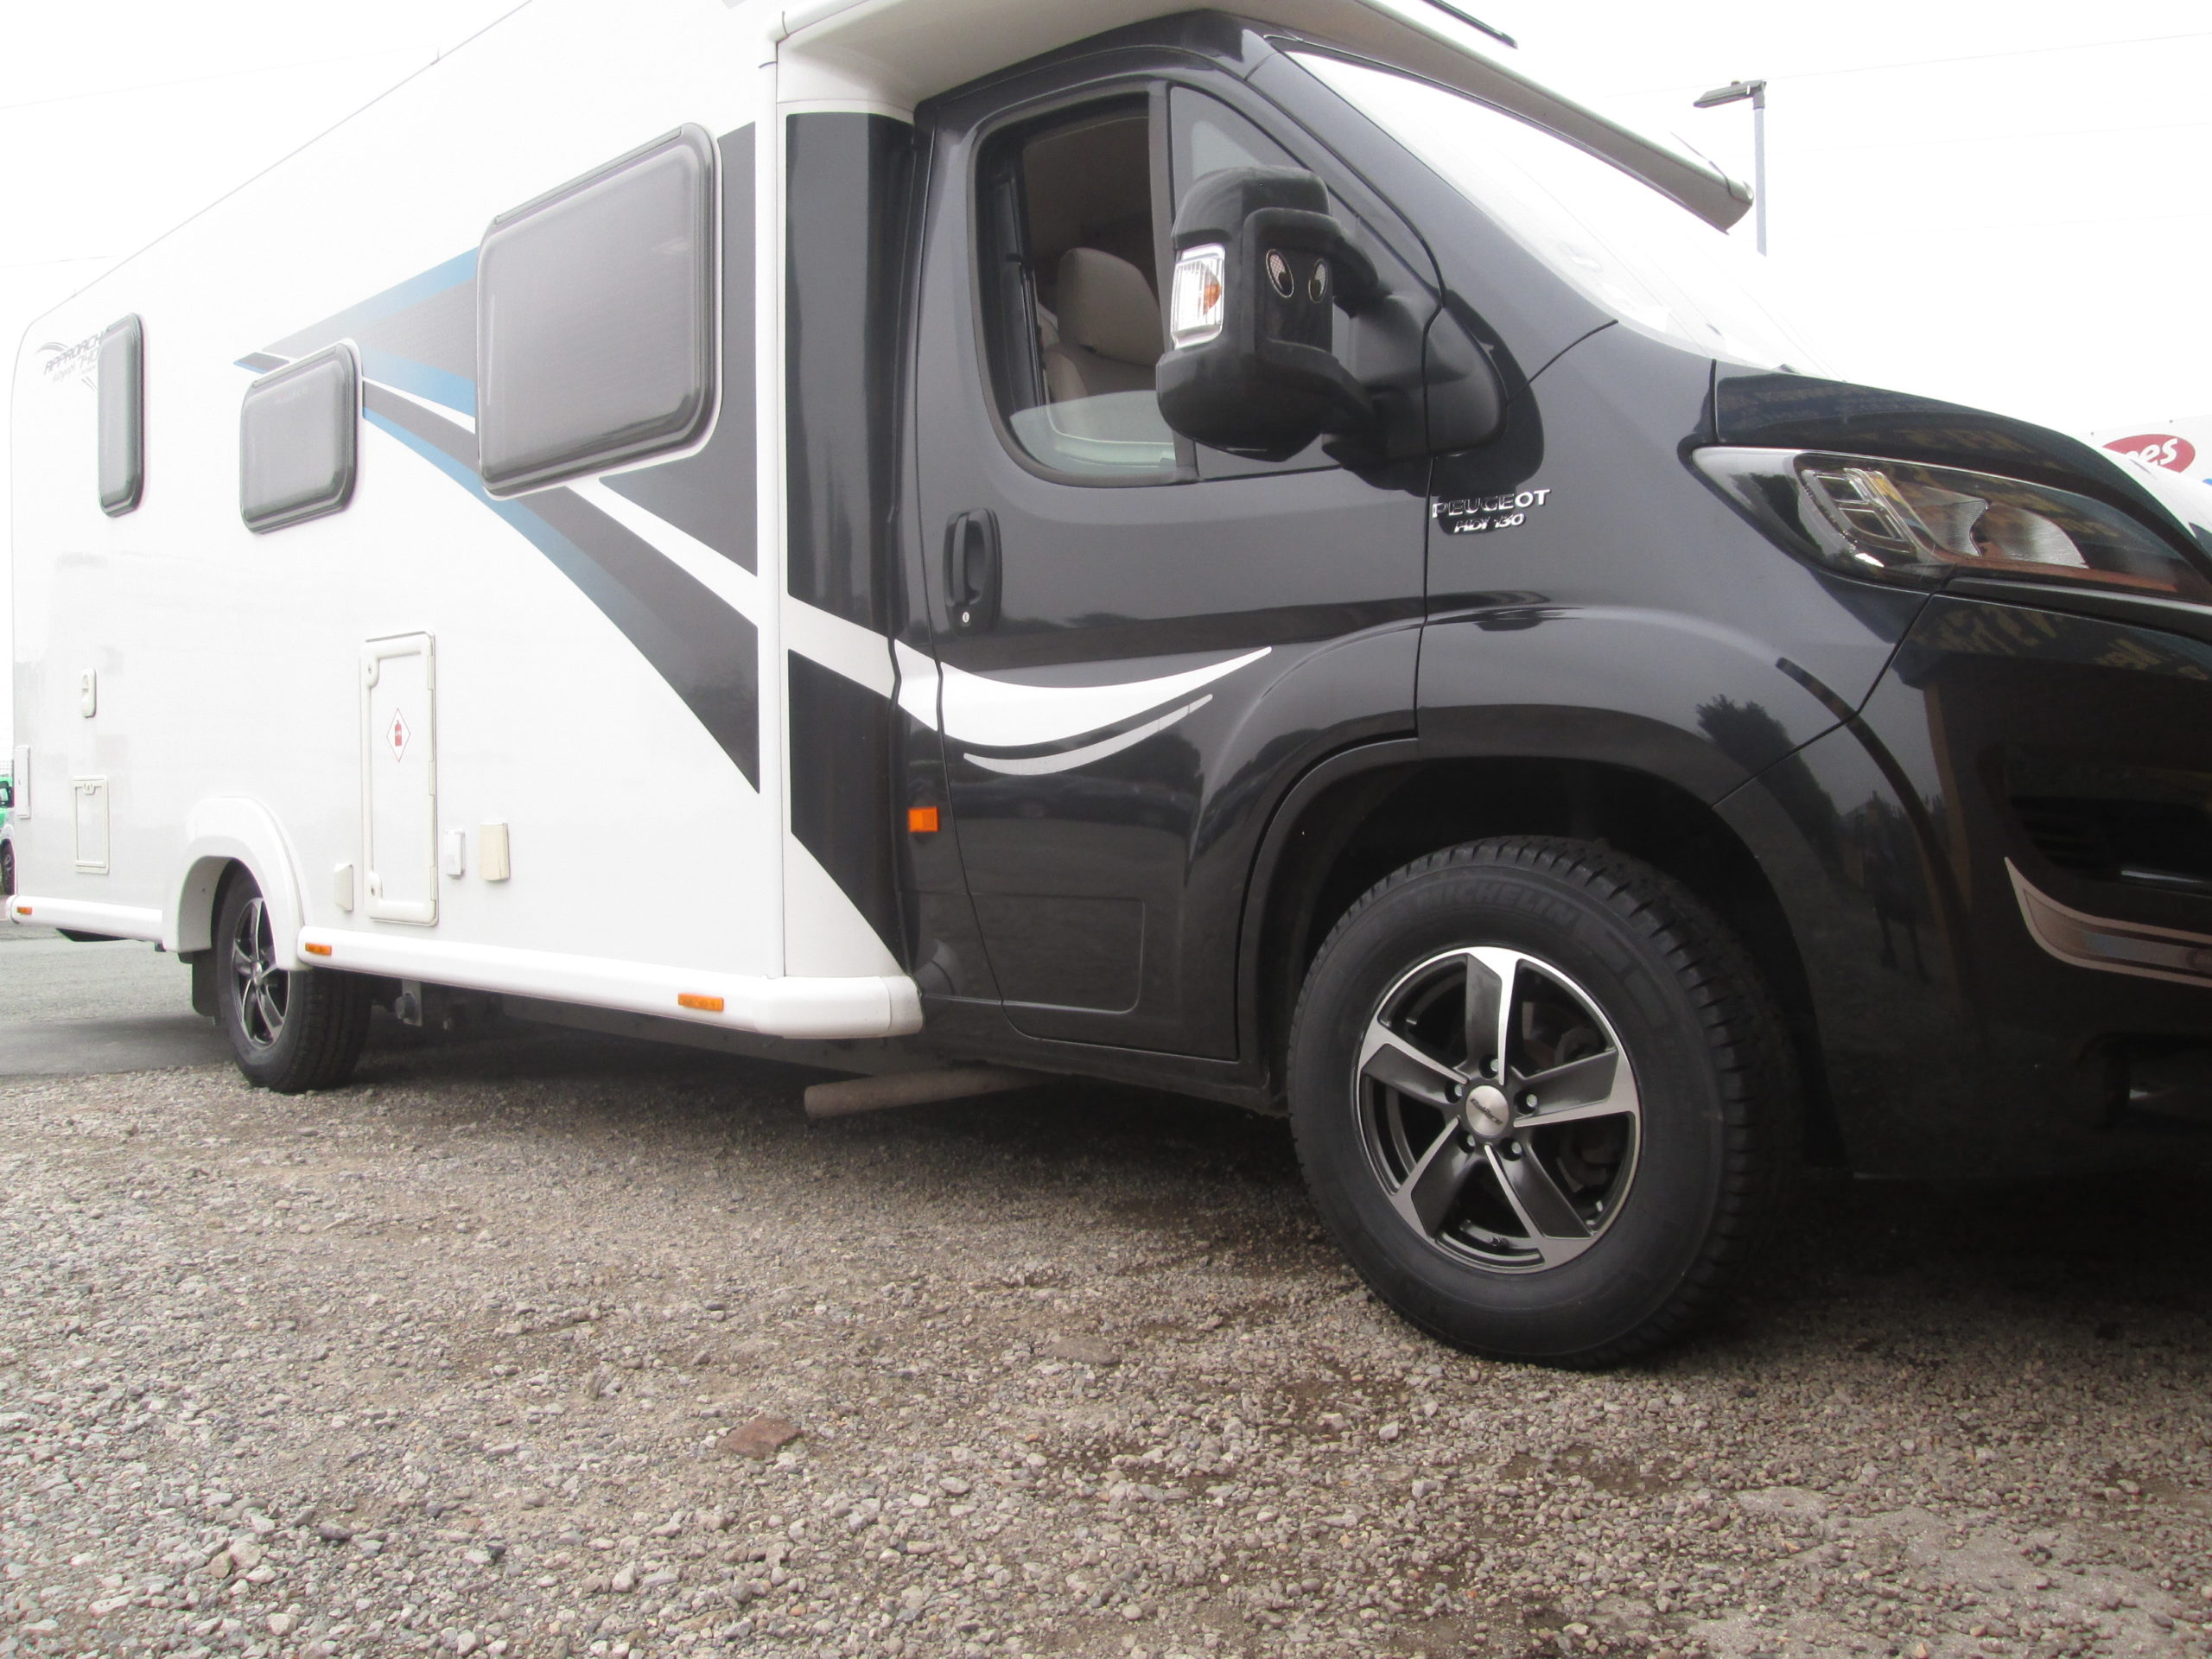 Calibre Freeway 16" Alloys on Peugeot Boxer with 215/75R16 Michelin Camping (upgrade from 15")